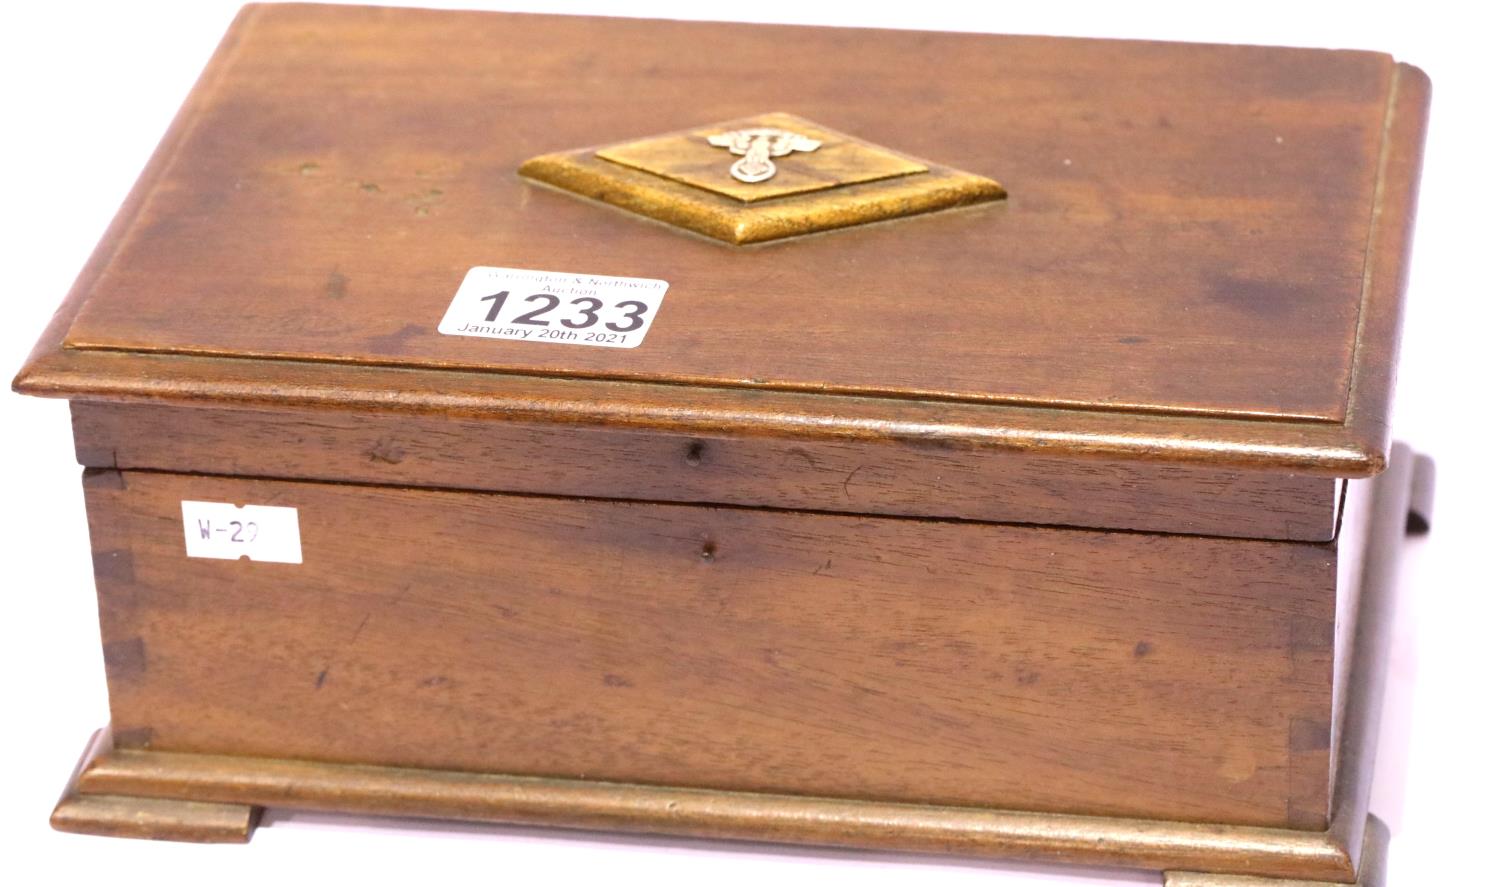 WWII German N.S.K.K memento box. P&P Group 2 (£18+VAT for the first lot and £3+VAT for subsequent